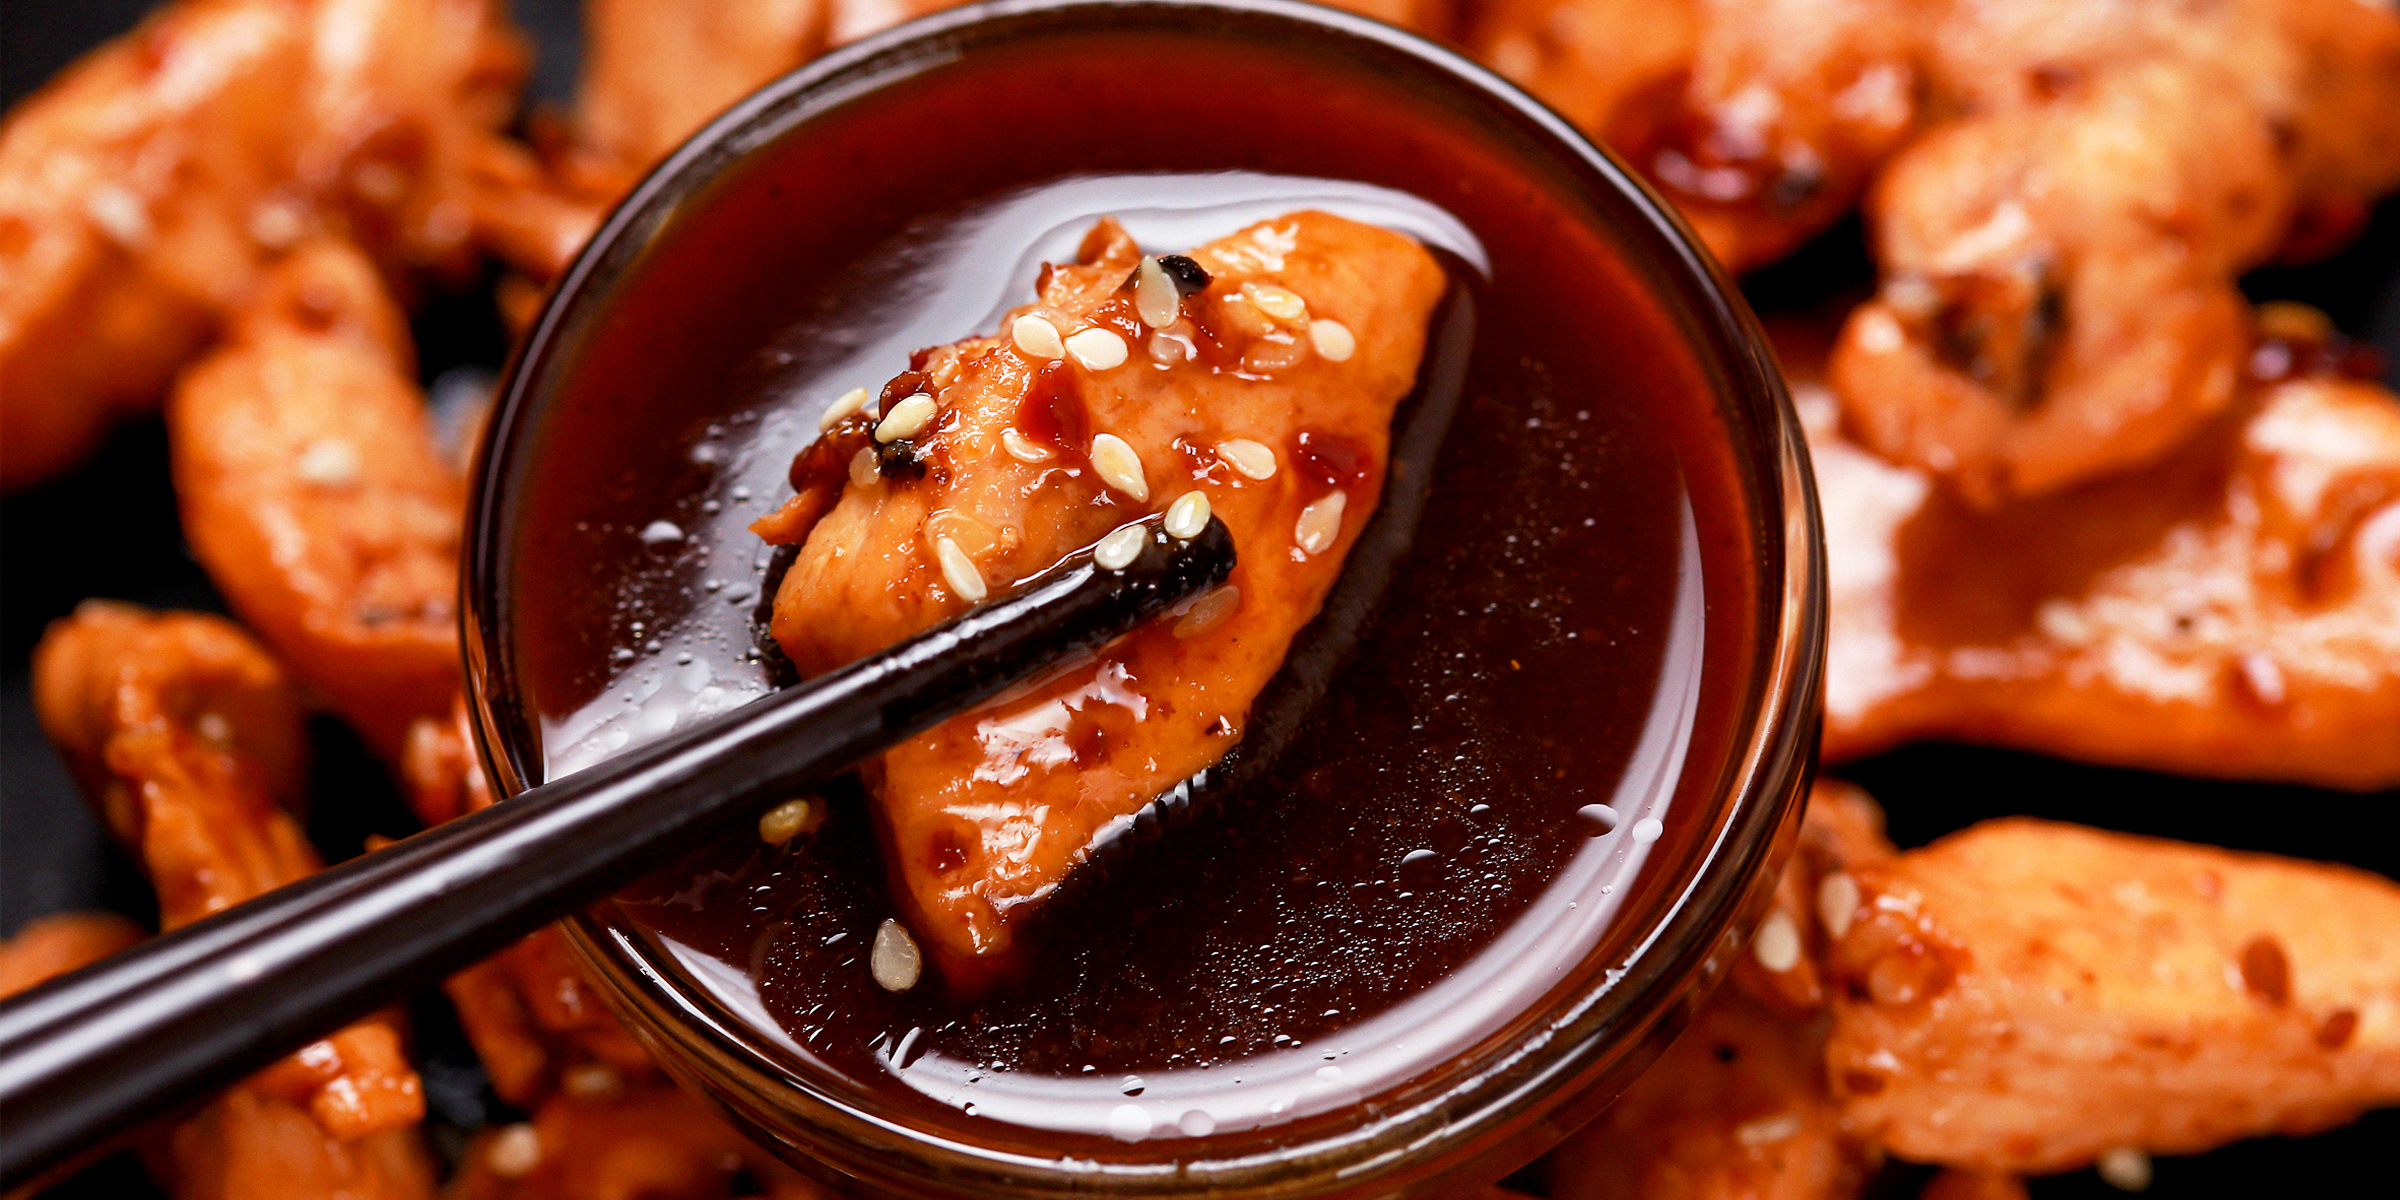 A bite-sized piece of chicken dipped in soyaki sauce | Source: Shutterstock